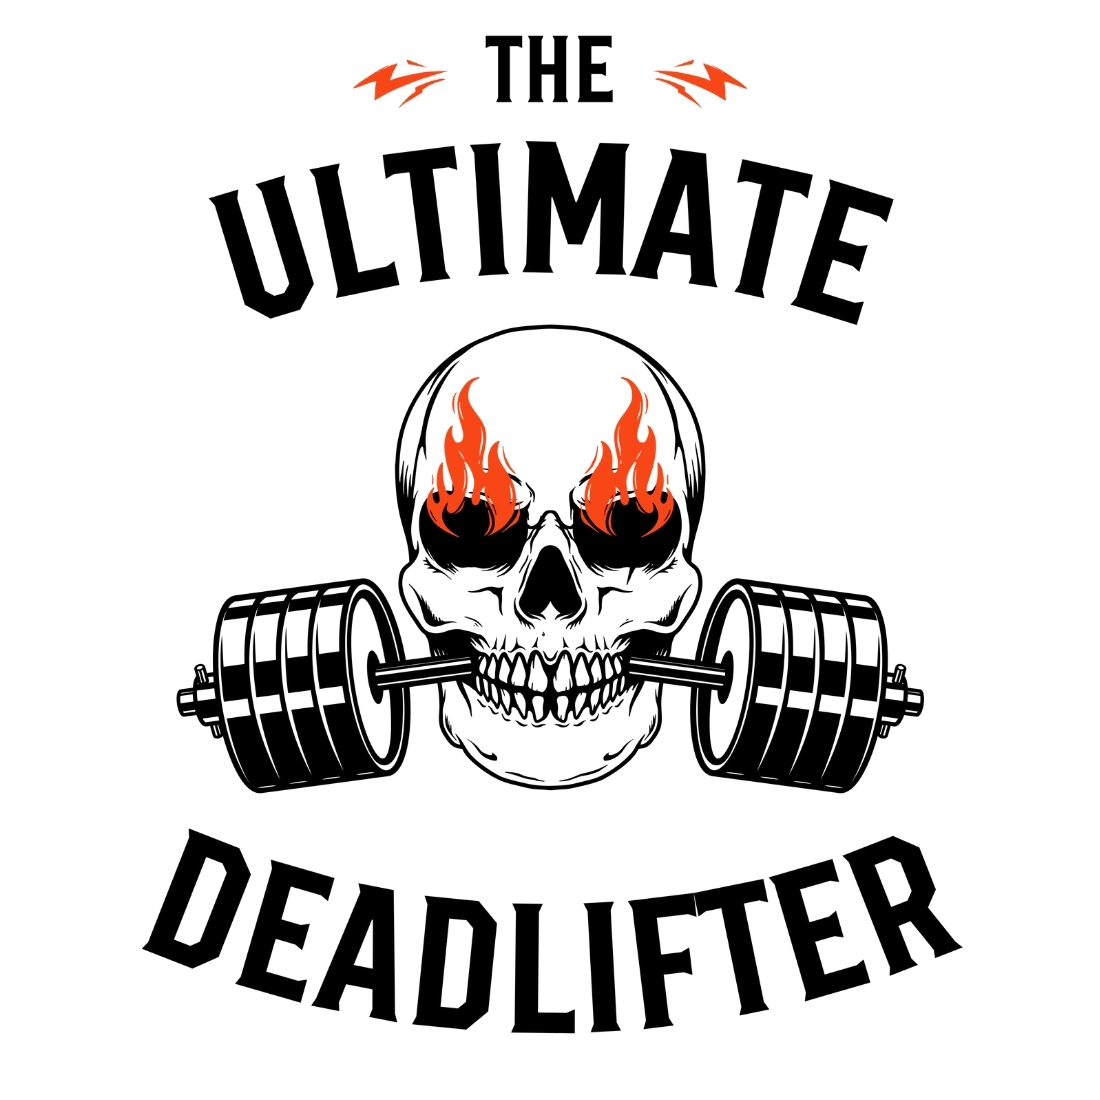 The Ultimate Deadlifter Design SVG, PNG cover image.